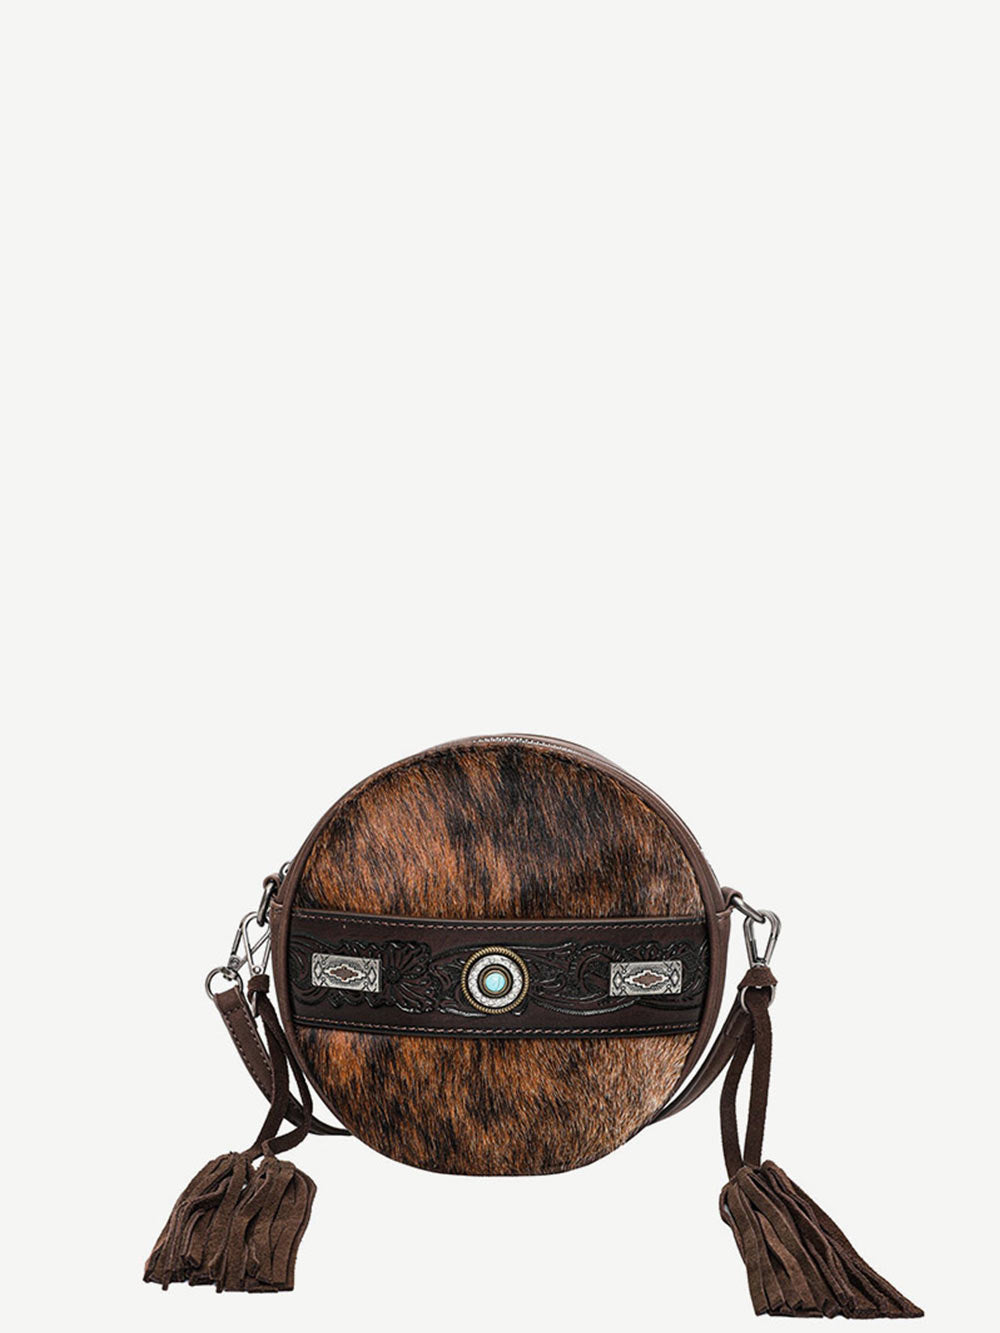 Trinity Ranch Hair On Cowhide Collection Crossbody Circle Bag - Montana West World